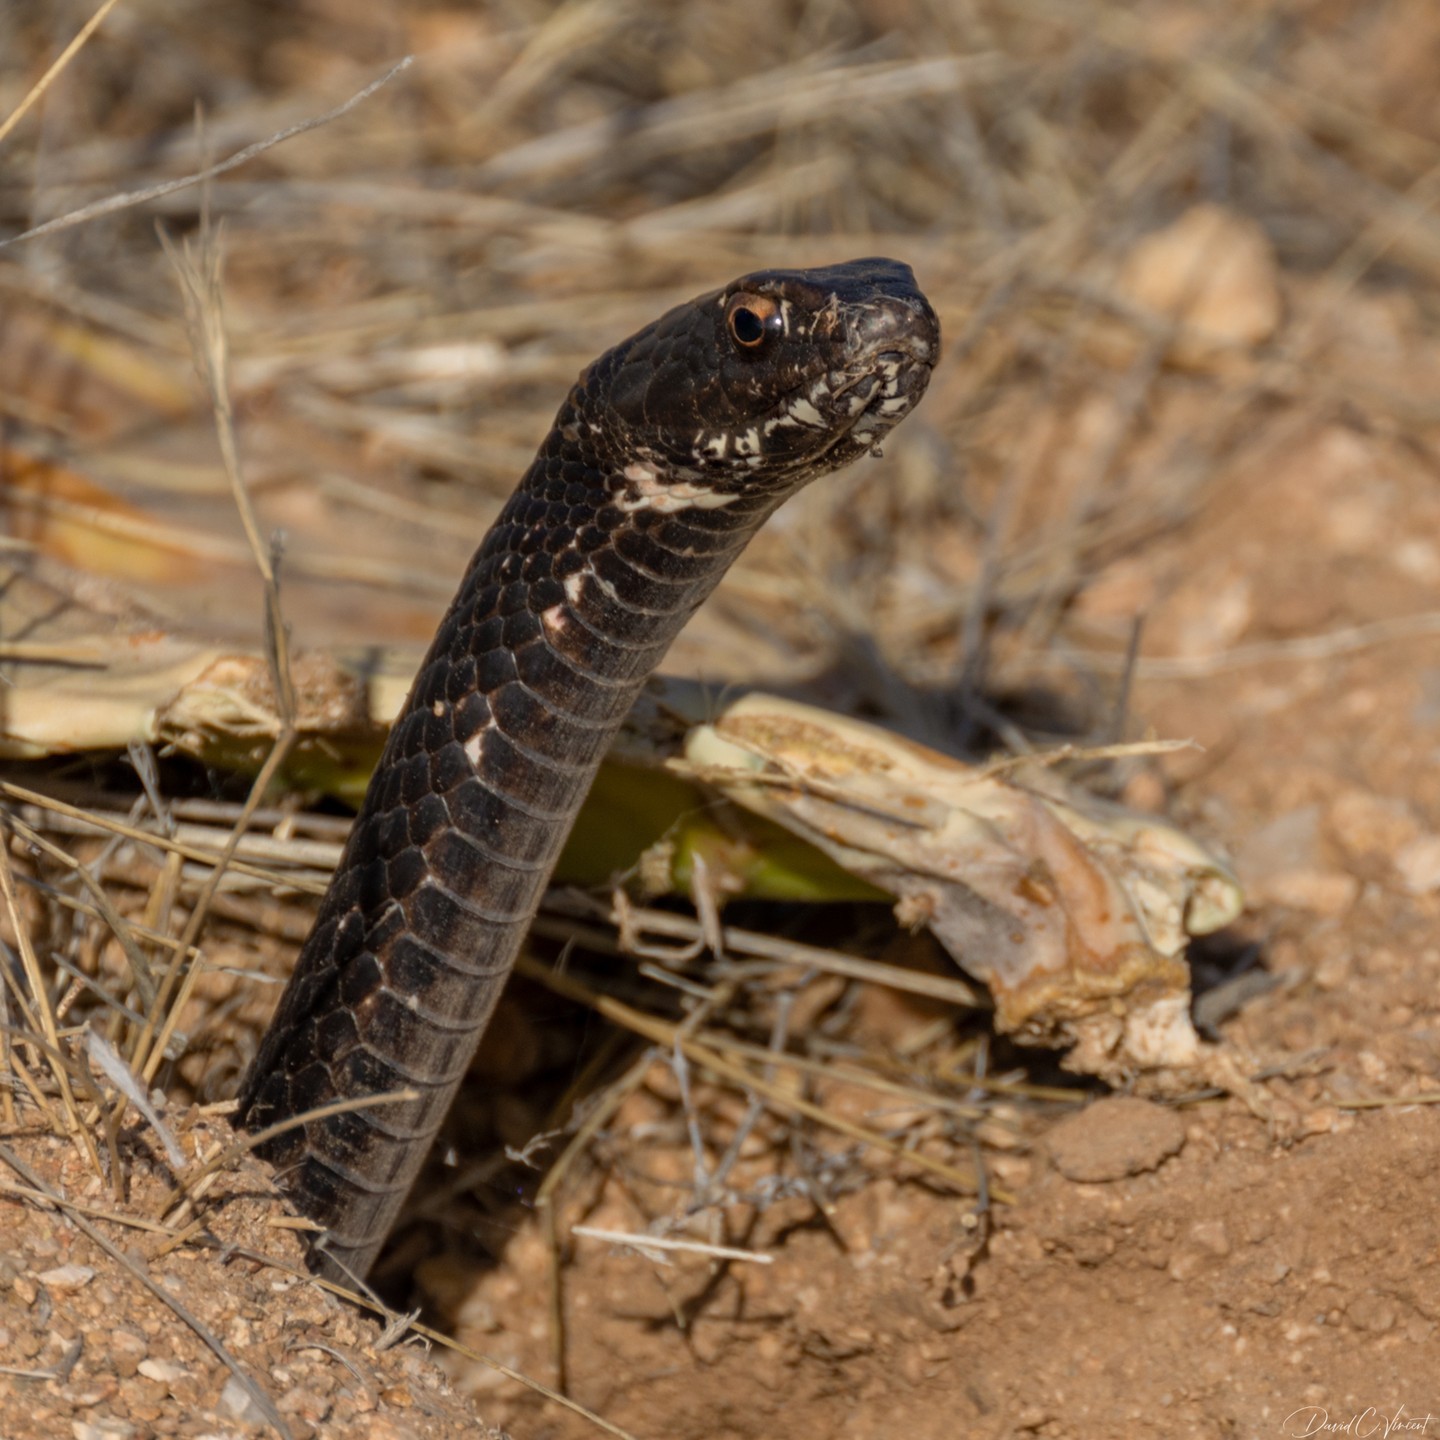 The head of a coachwhip snake, which is very dark colored, sticking up out of a hole in the ground.